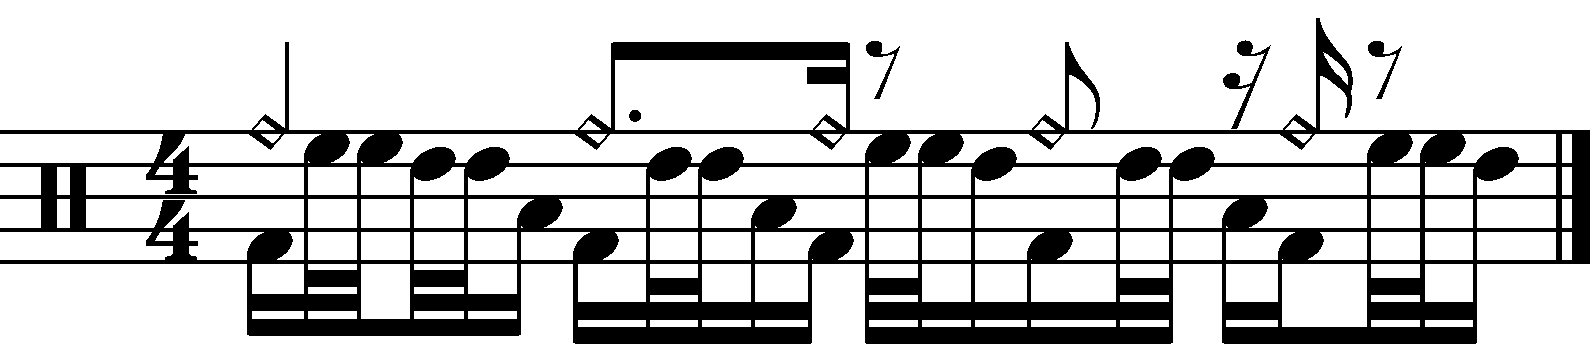 Syncopated 16th note 43333 fills